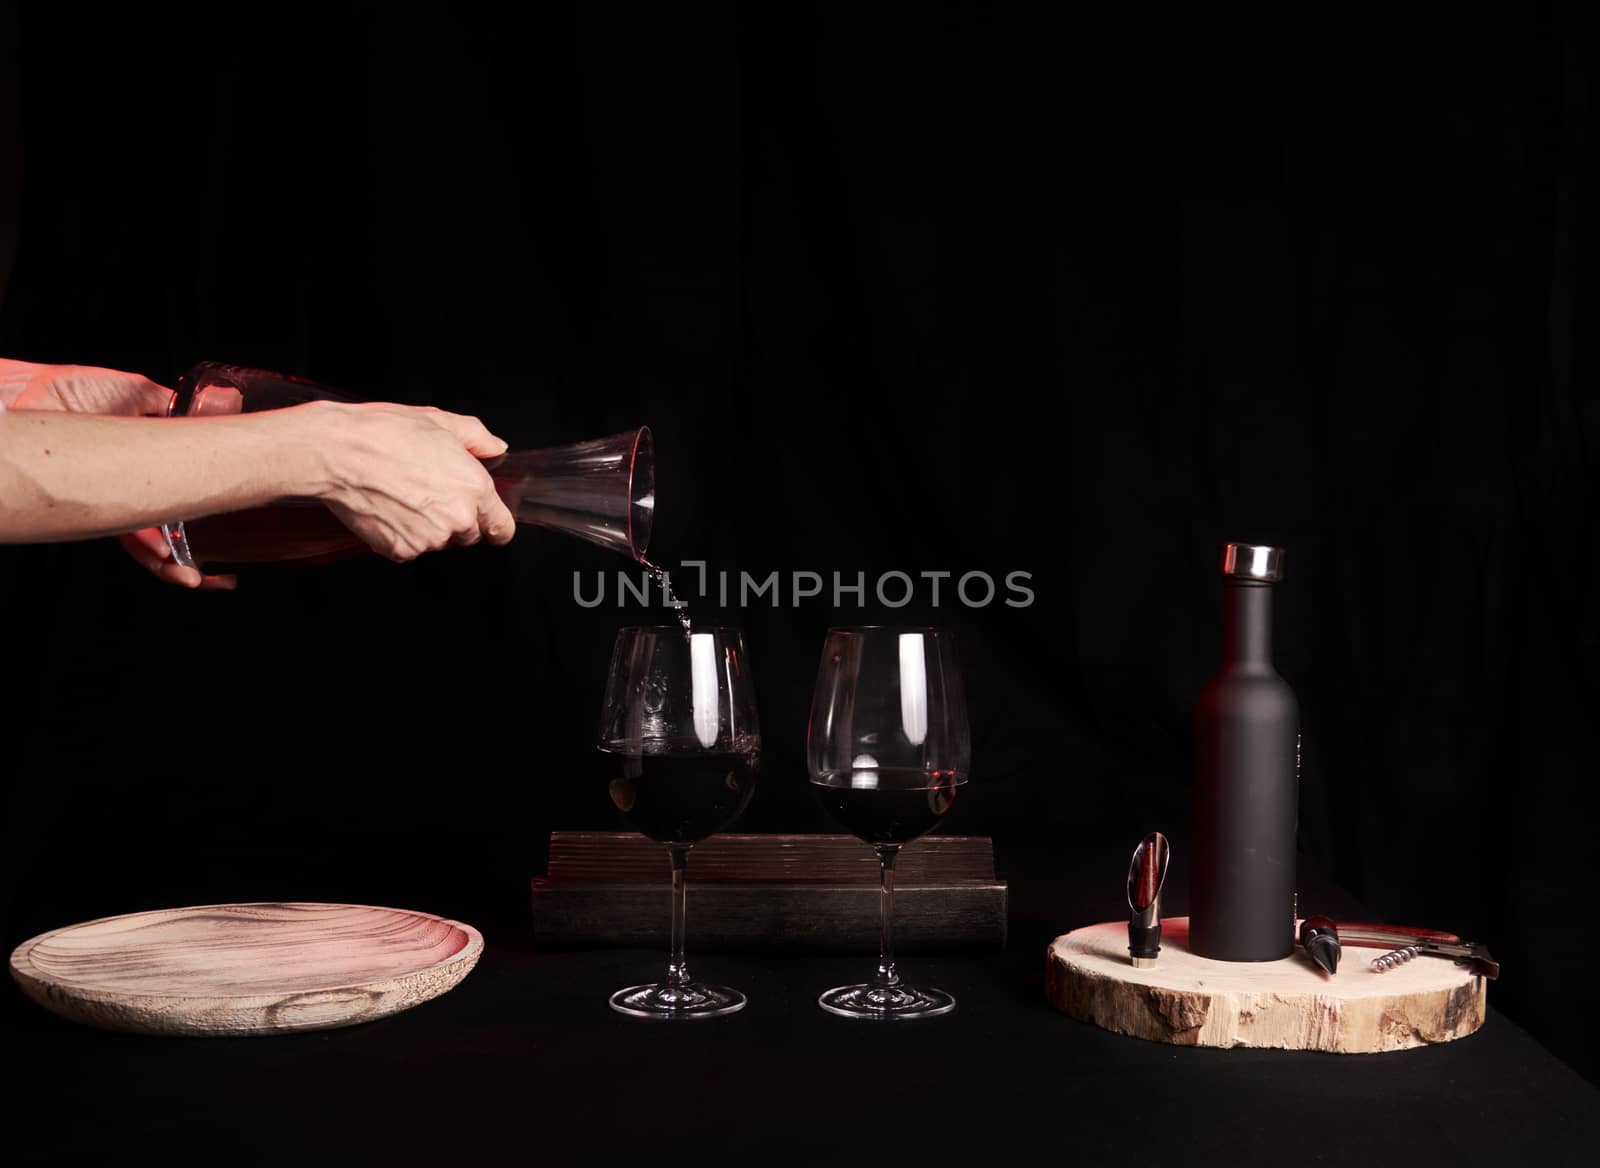 Pouring two wine glasses on black background, glass pourer wine bottle and wine utensils